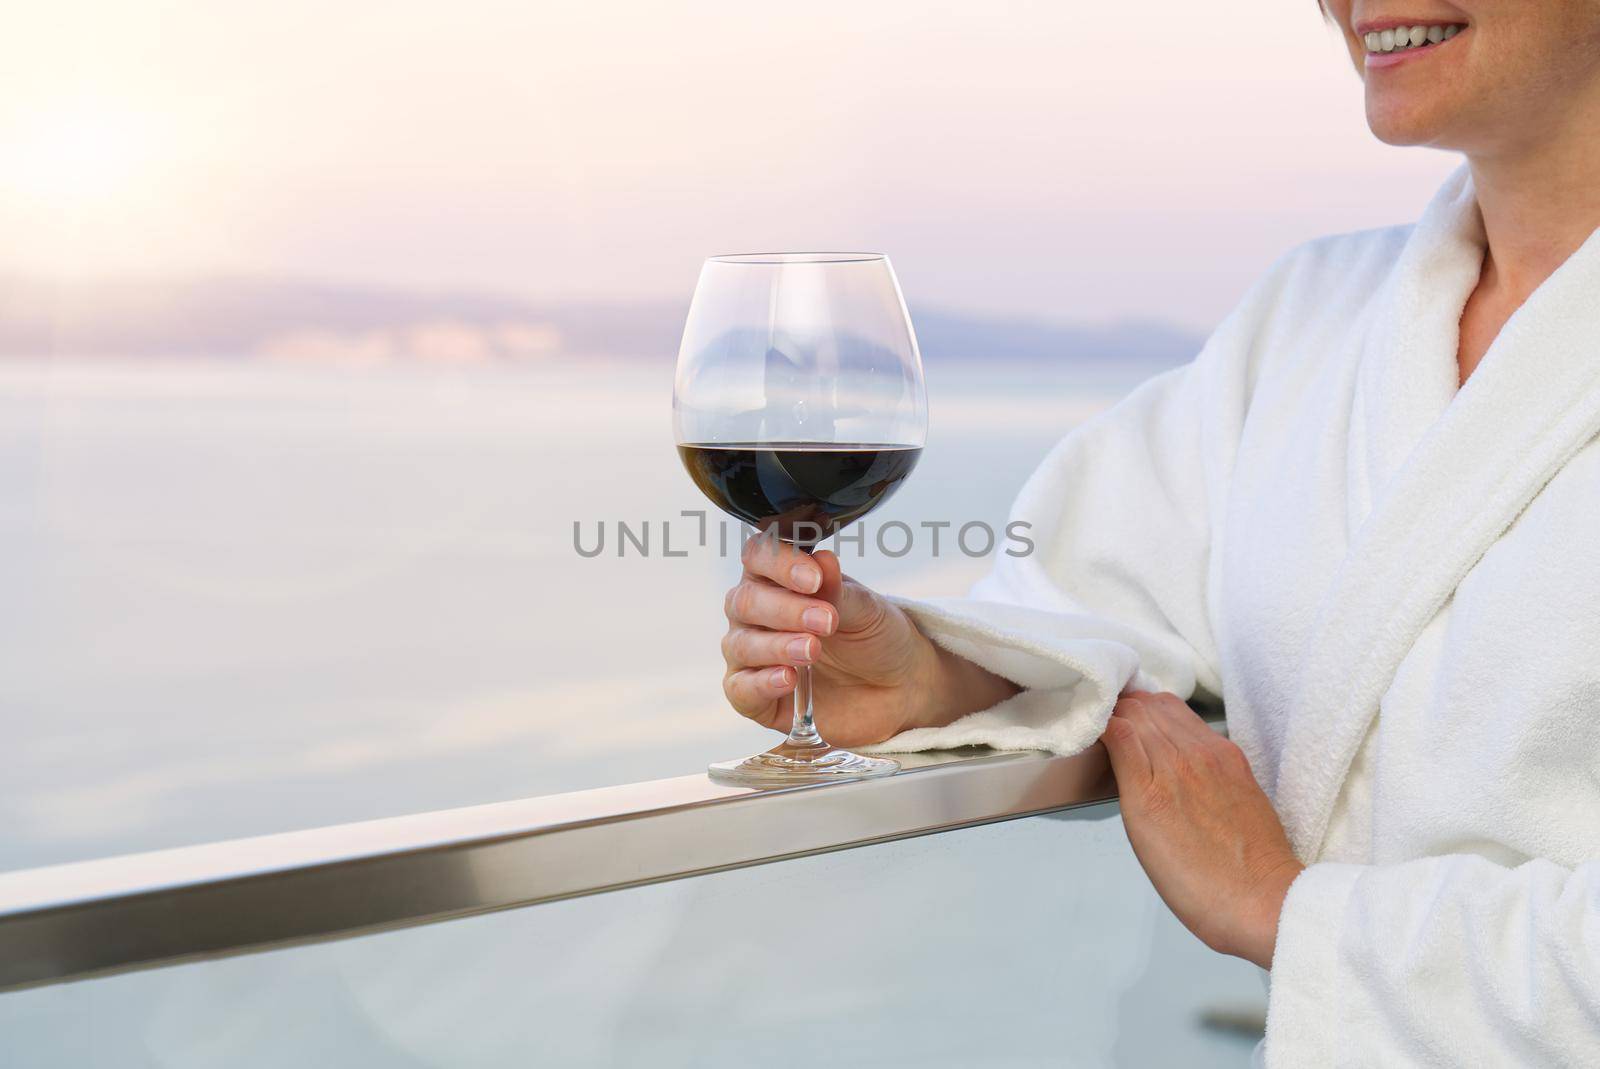 The elegant female hand holding a glass of red wine with the background of a sunny seaside view.